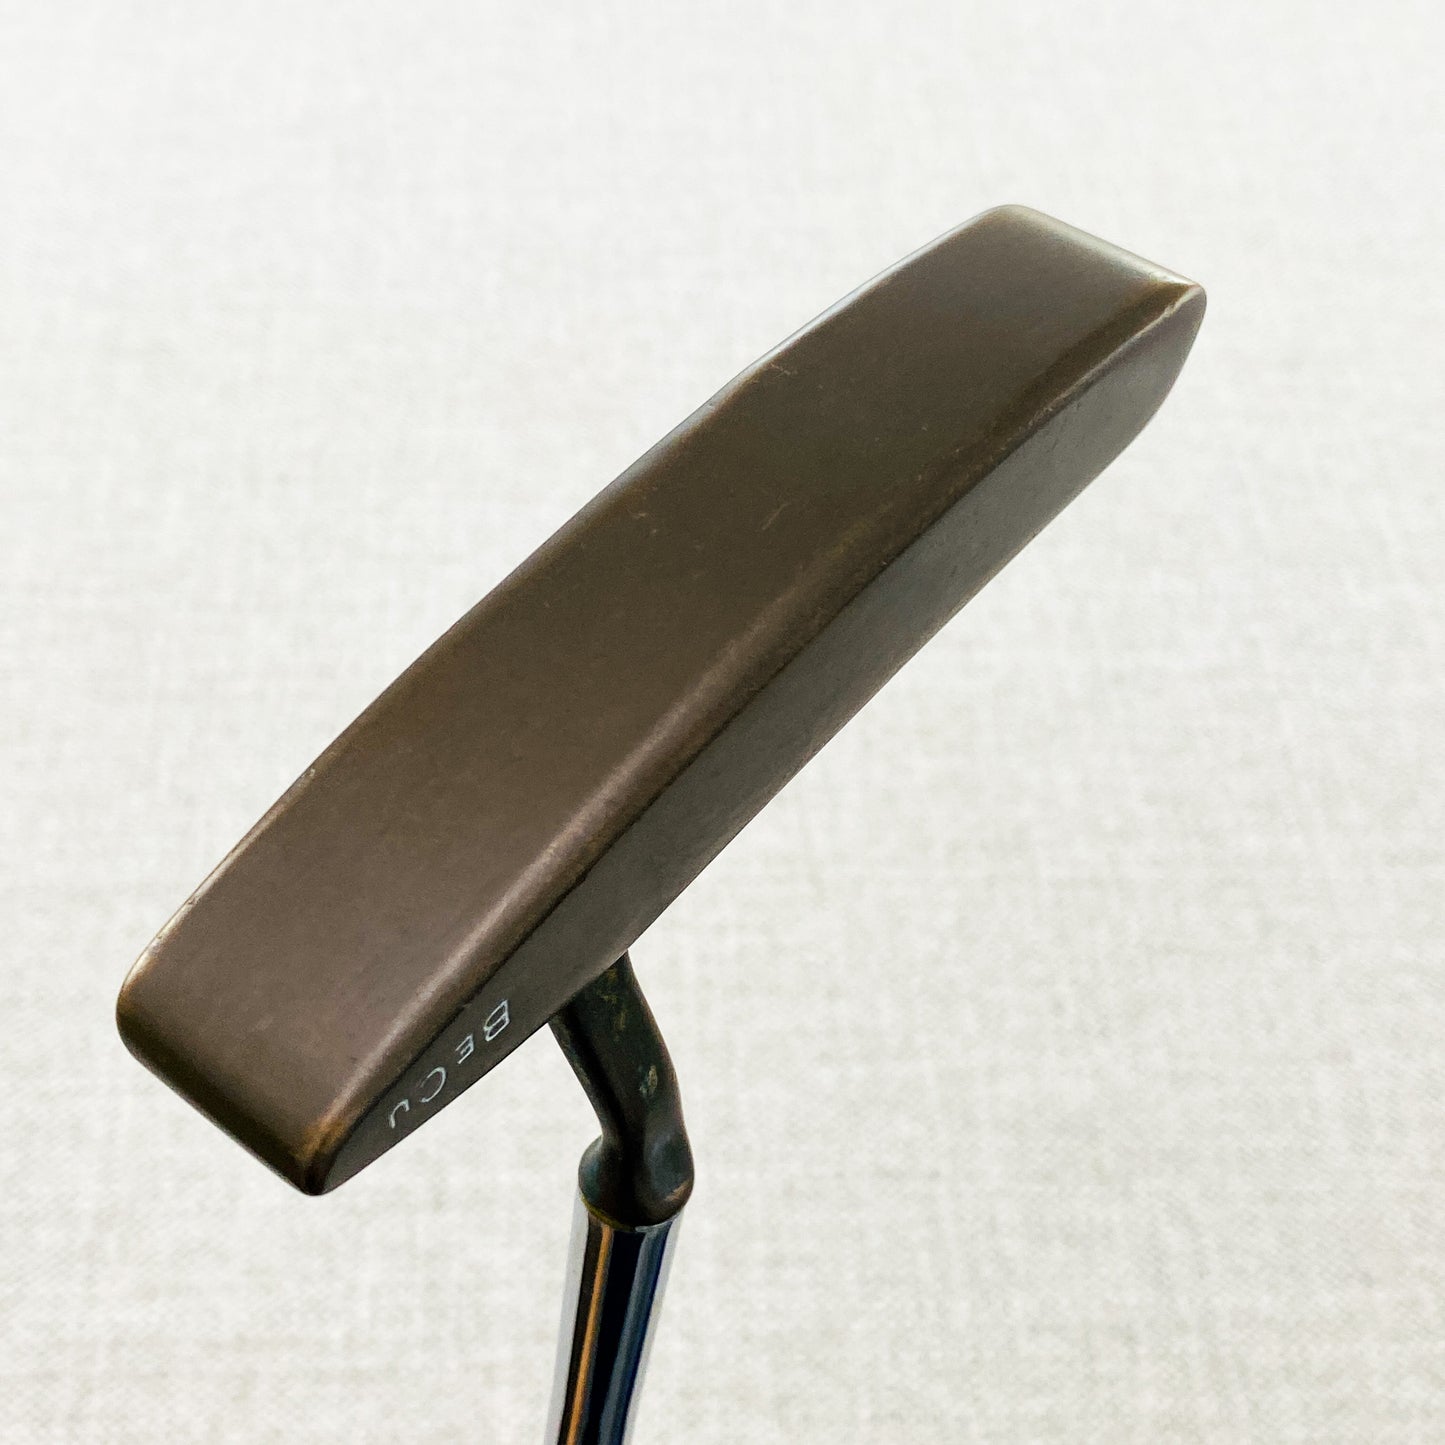 PING Pal 2 BeCu Putter. 35 inch - Very Good Condition # 9722